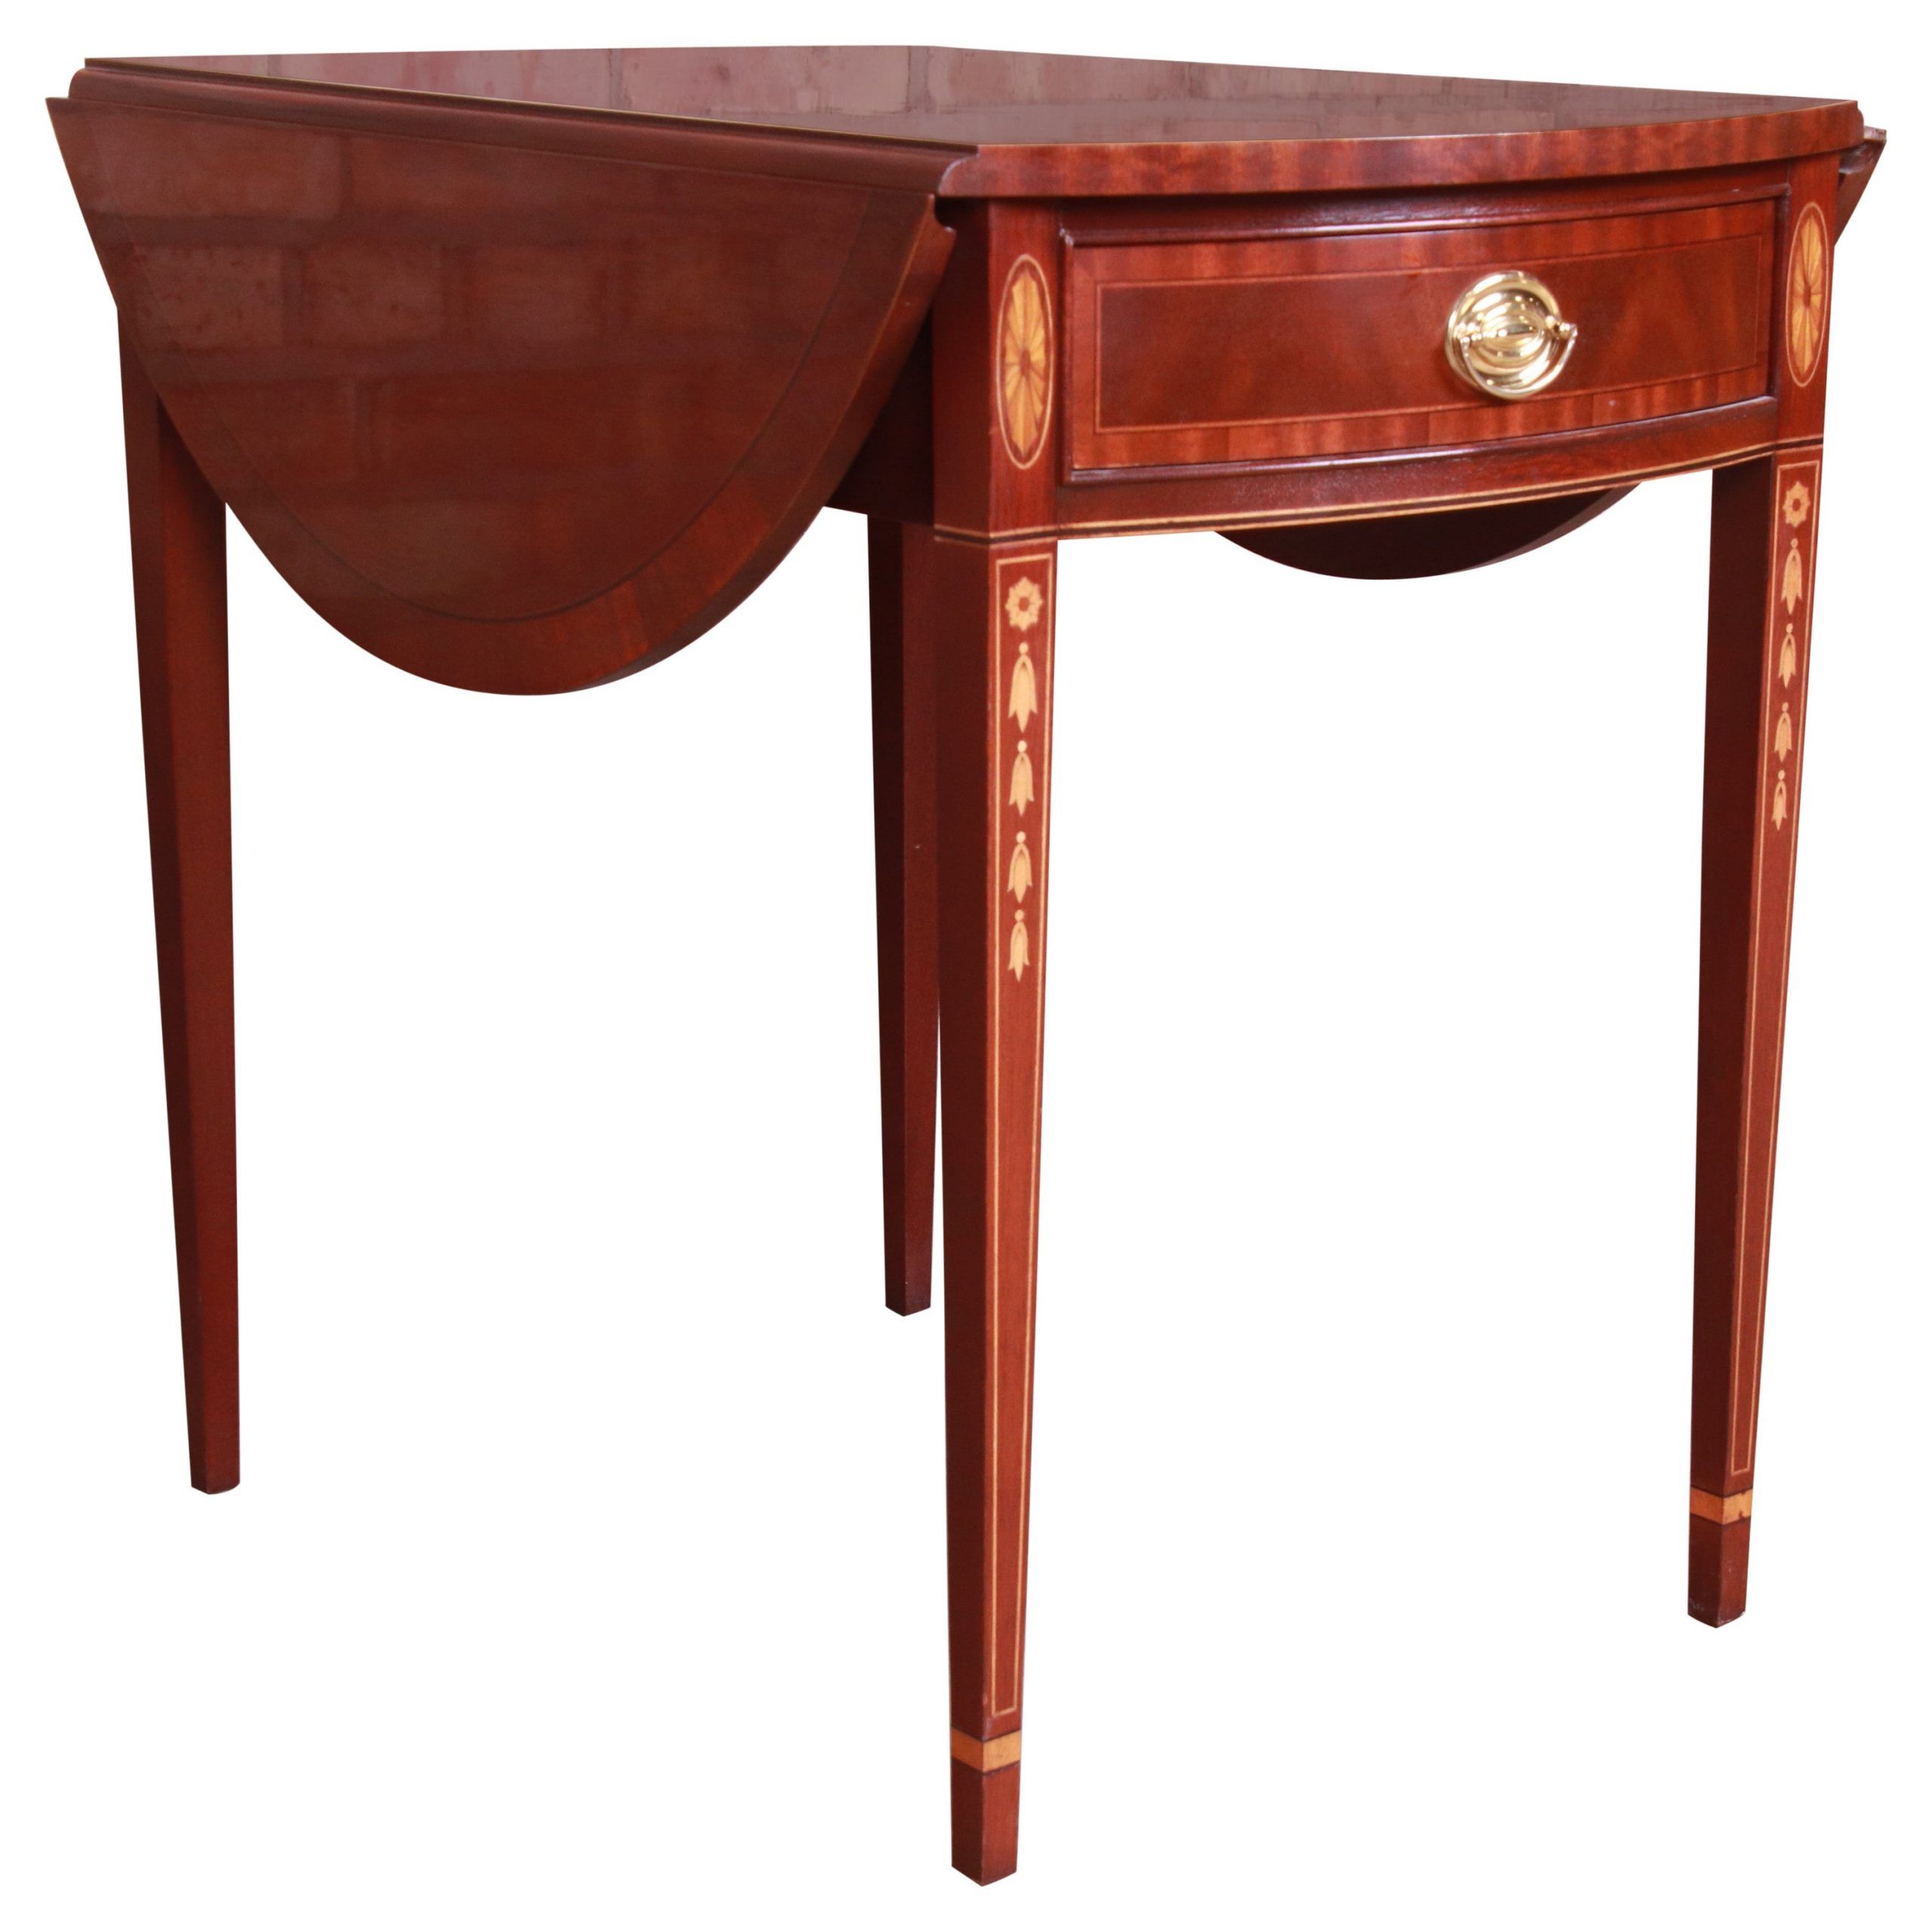 Very Pretty Small Oval Flame Mahogany Coffee Table Or Side Pertaining To Favorite 2 Drawer Oval Coffee Tables (View 2 of 20)